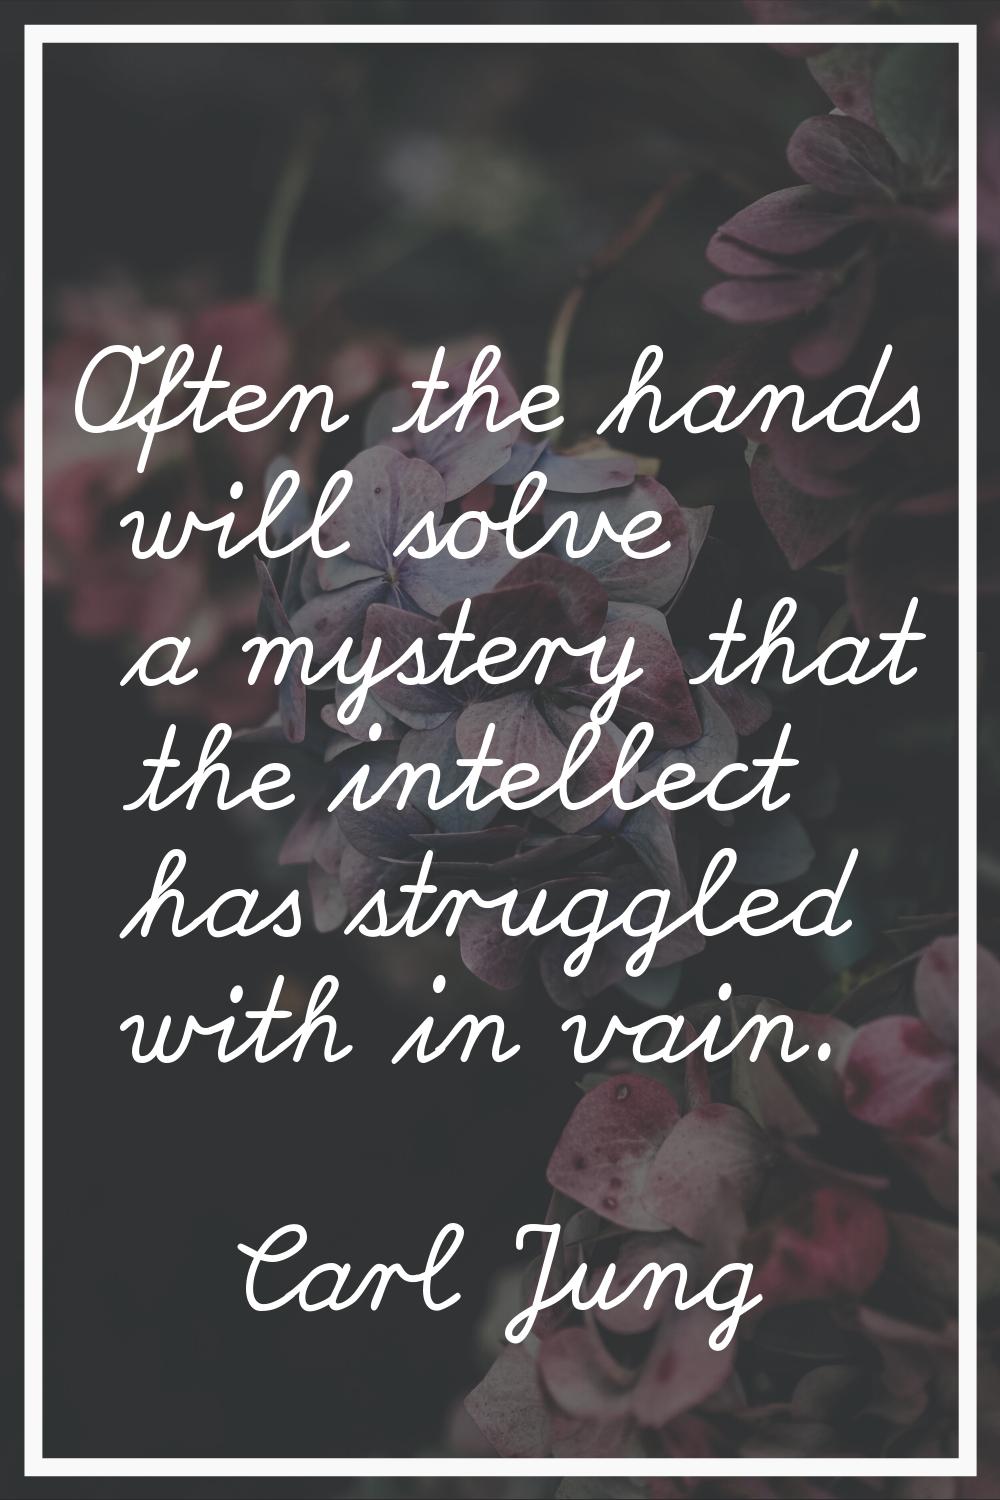 Often the hands will solve a mystery that the intellect has struggled with in vain.